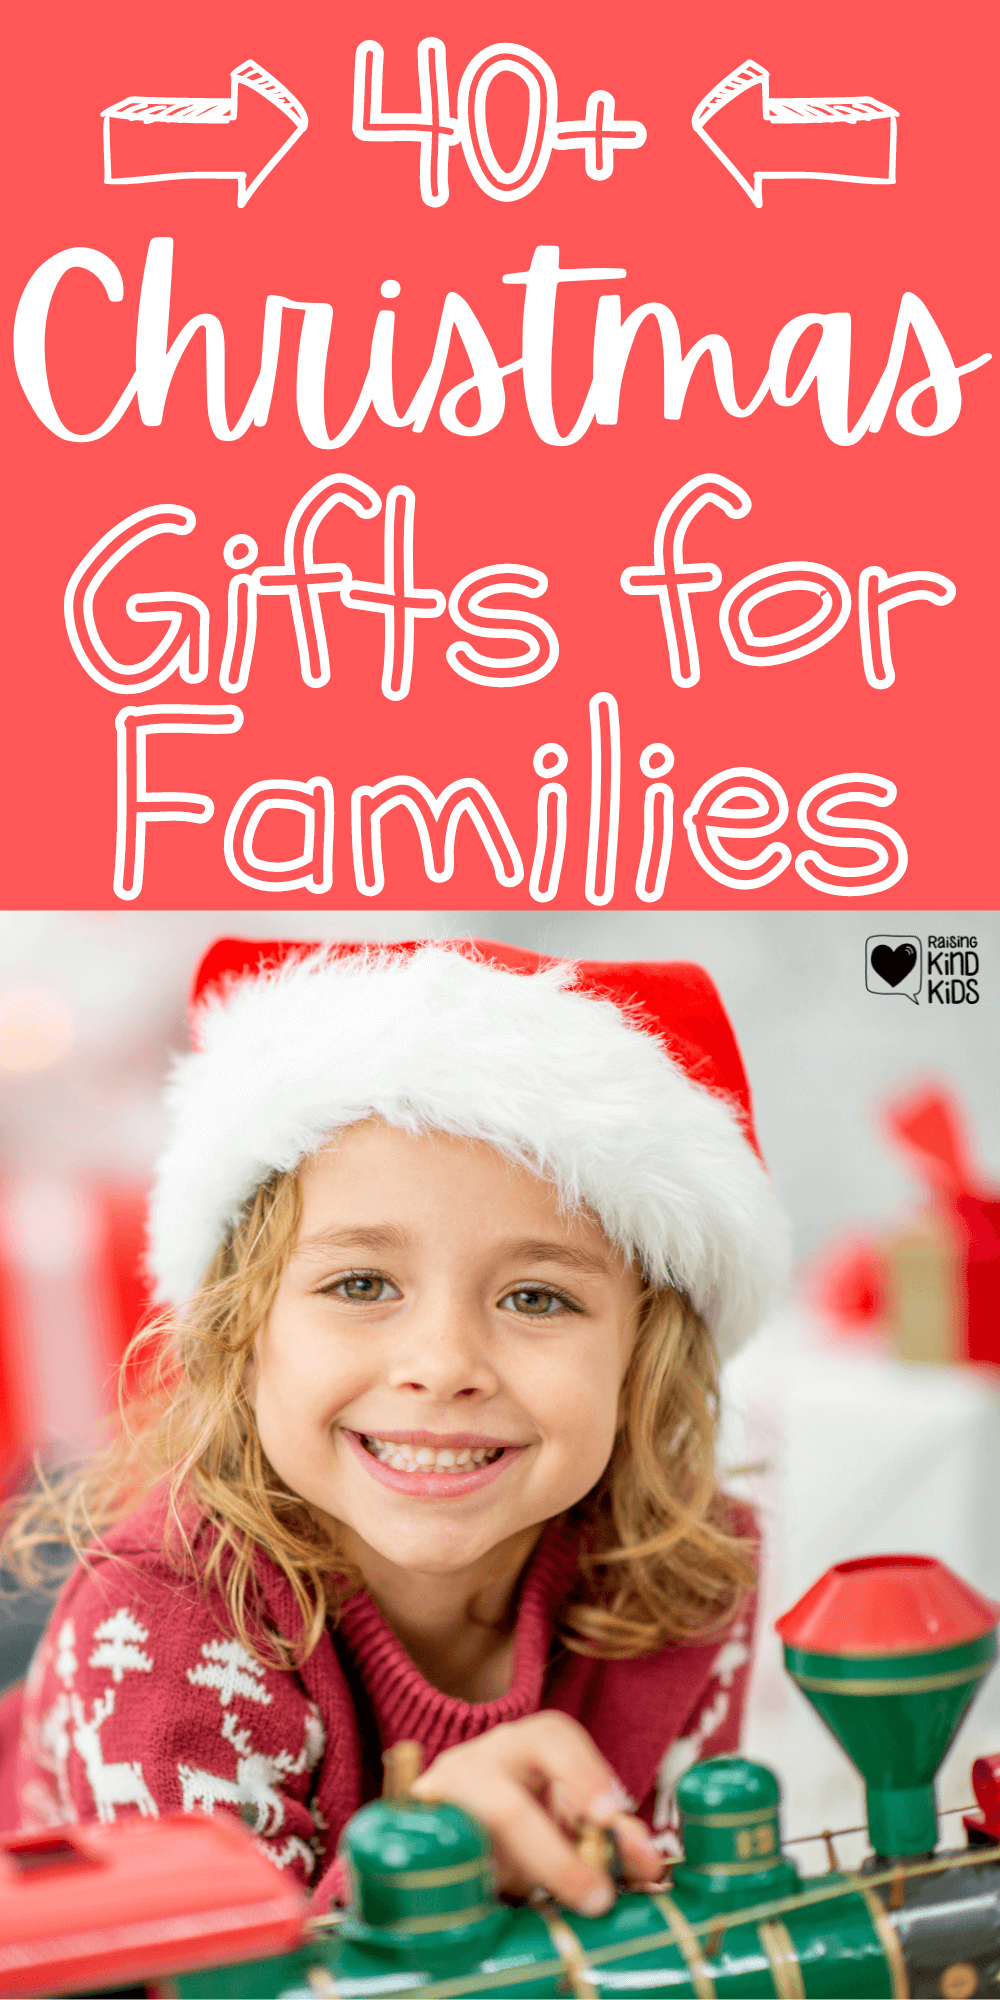 You'll love these Christmas theme gits for kids and families to enjoy together that will make December even more spirited.